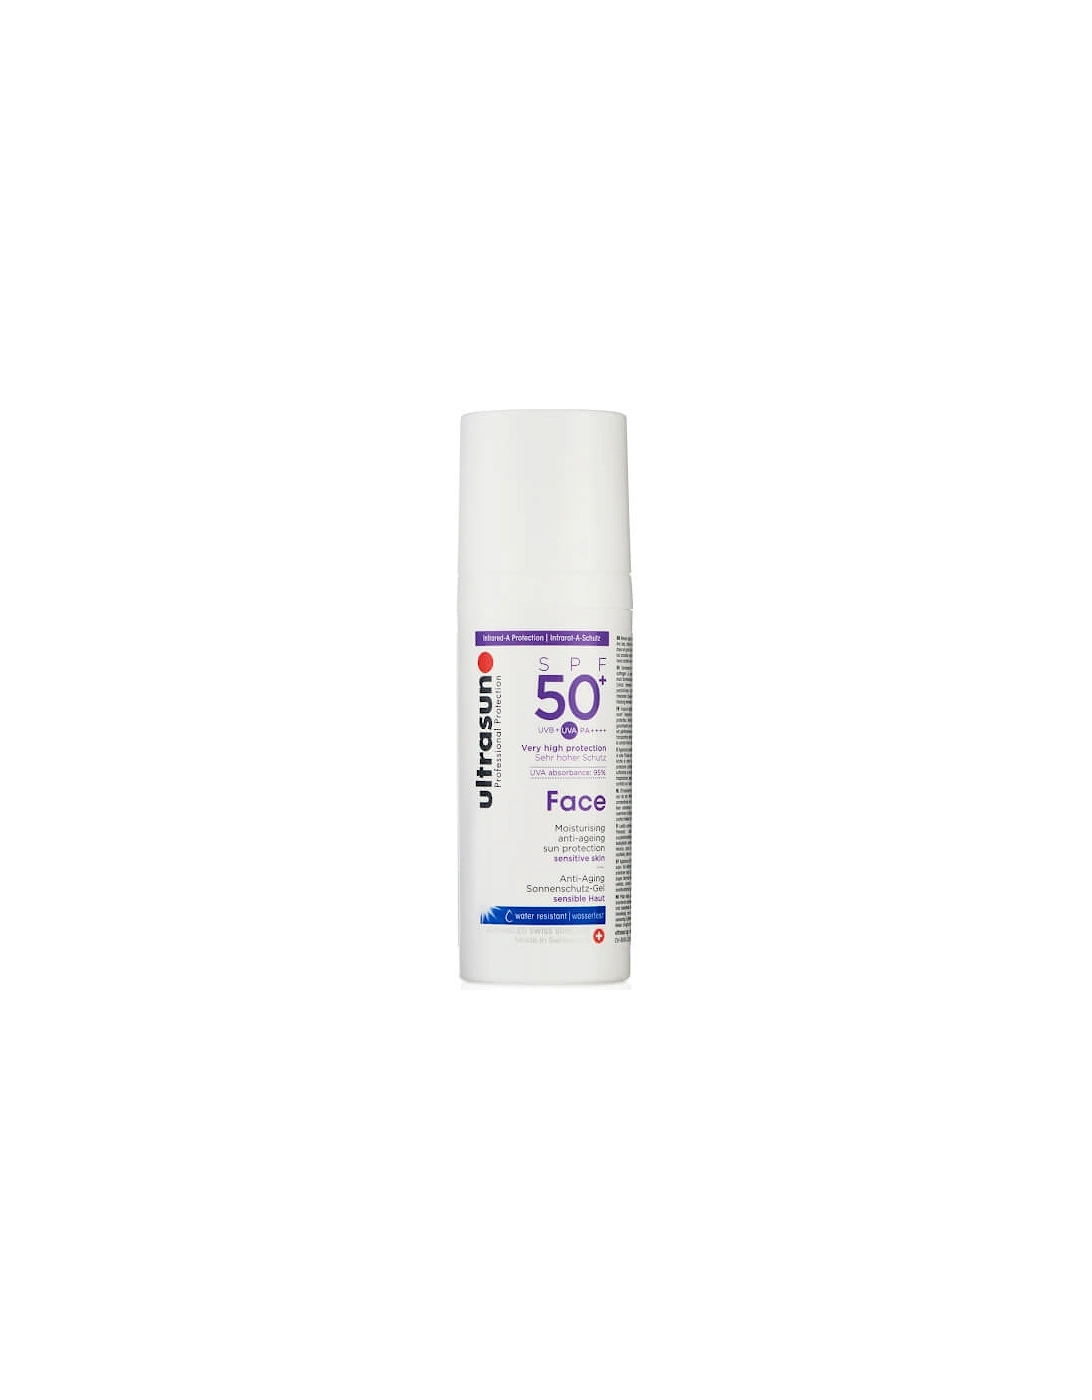 Face Anti-Ageing Lotion SPF 50+ 50ml - - Face Anti-Ageing Lotion SPF 50+ 50ml - Janice, 2 of 1